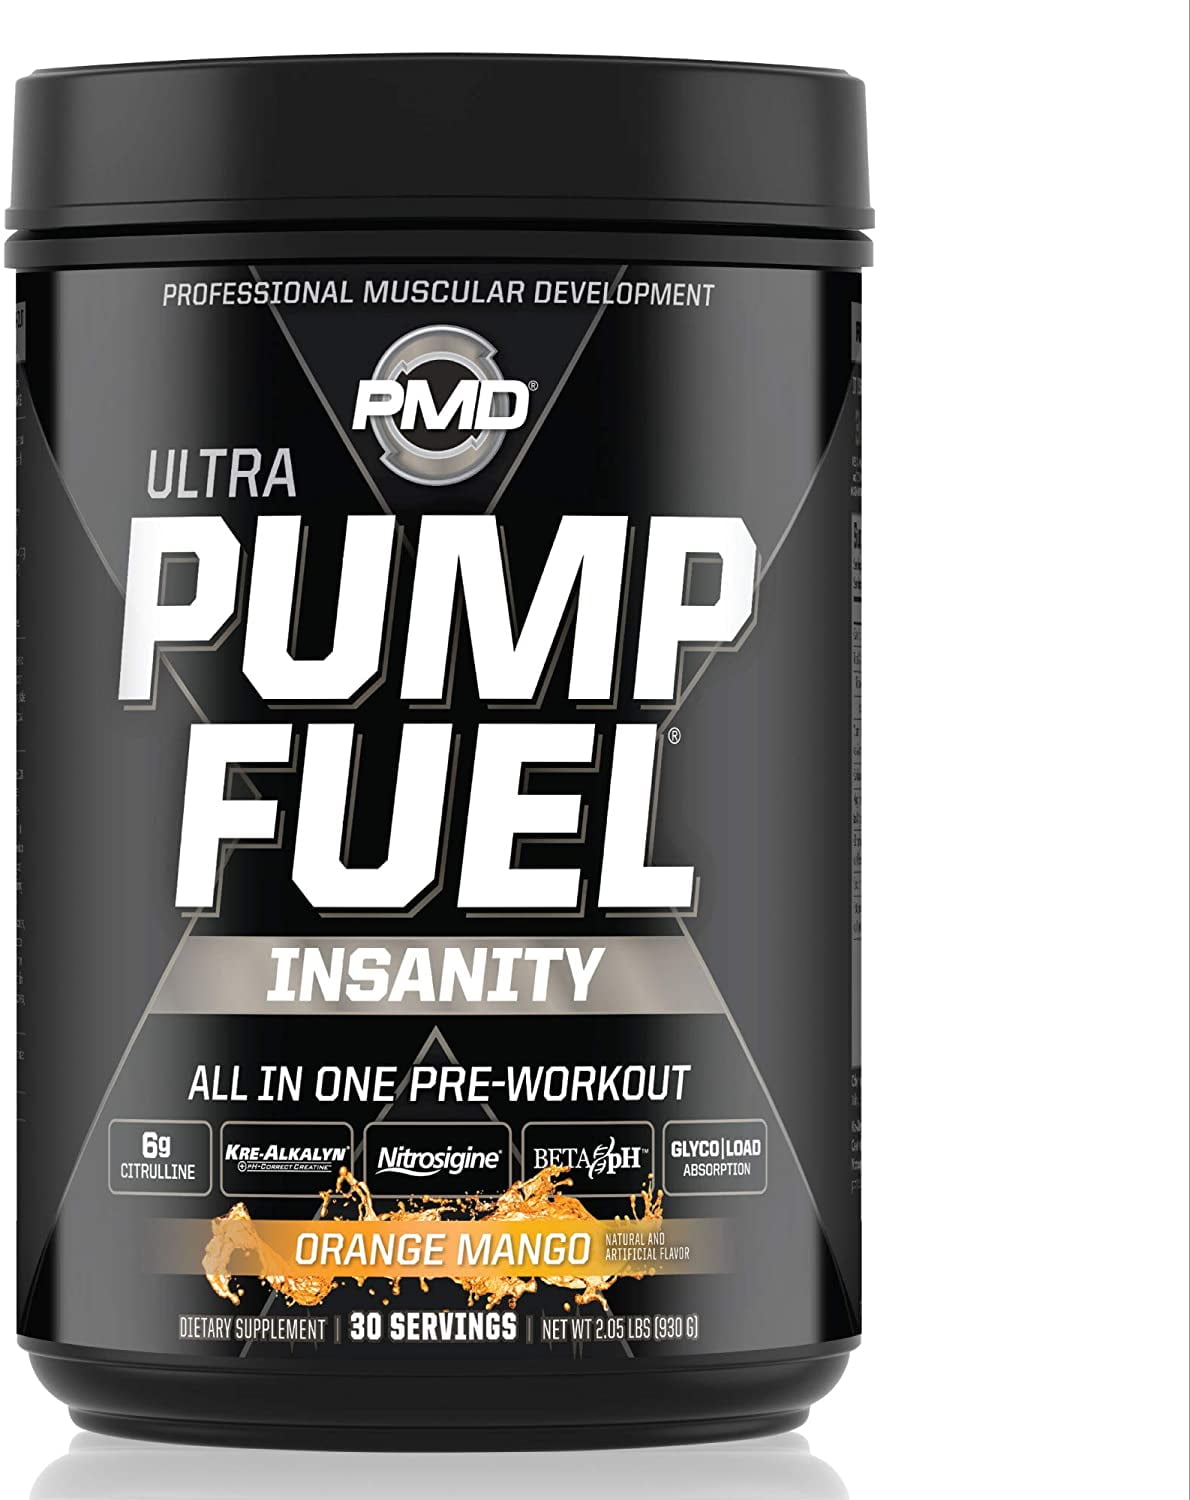 PMD Sports Ultra Pump Fuel Insanity - Pre Workout Drink Mix For Energy, Strength, Endurance, Muscle Pumps And Recovery - Complex Carbohydrates And Amino Energy - Tropical Orange Mango (30 Servings)